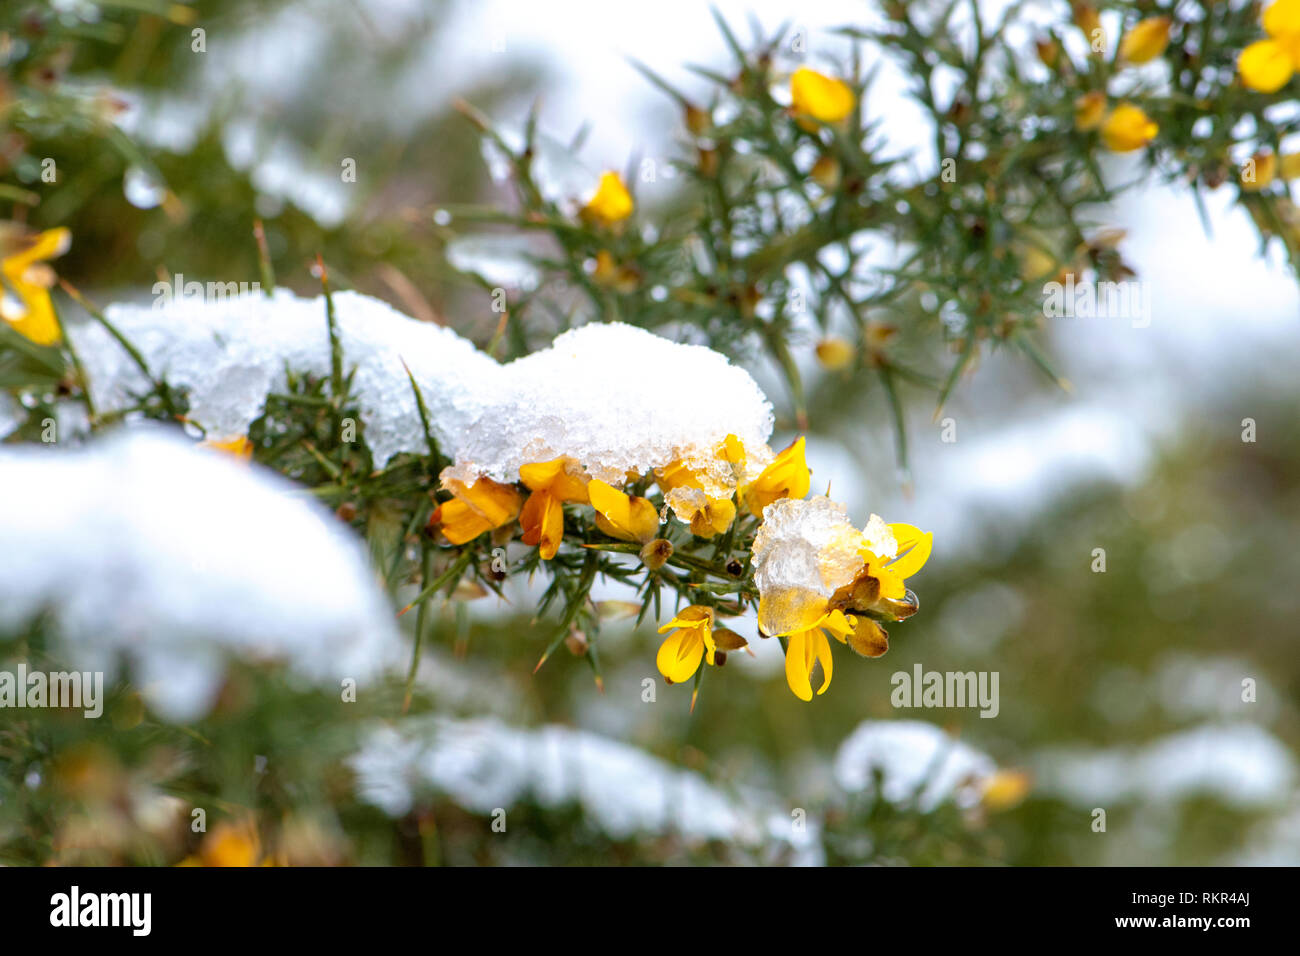 Close-up image of Gorse a yellow-flowered shrub of the pea family, the leaves of which are modified to form spines, in the snow Stock Photo